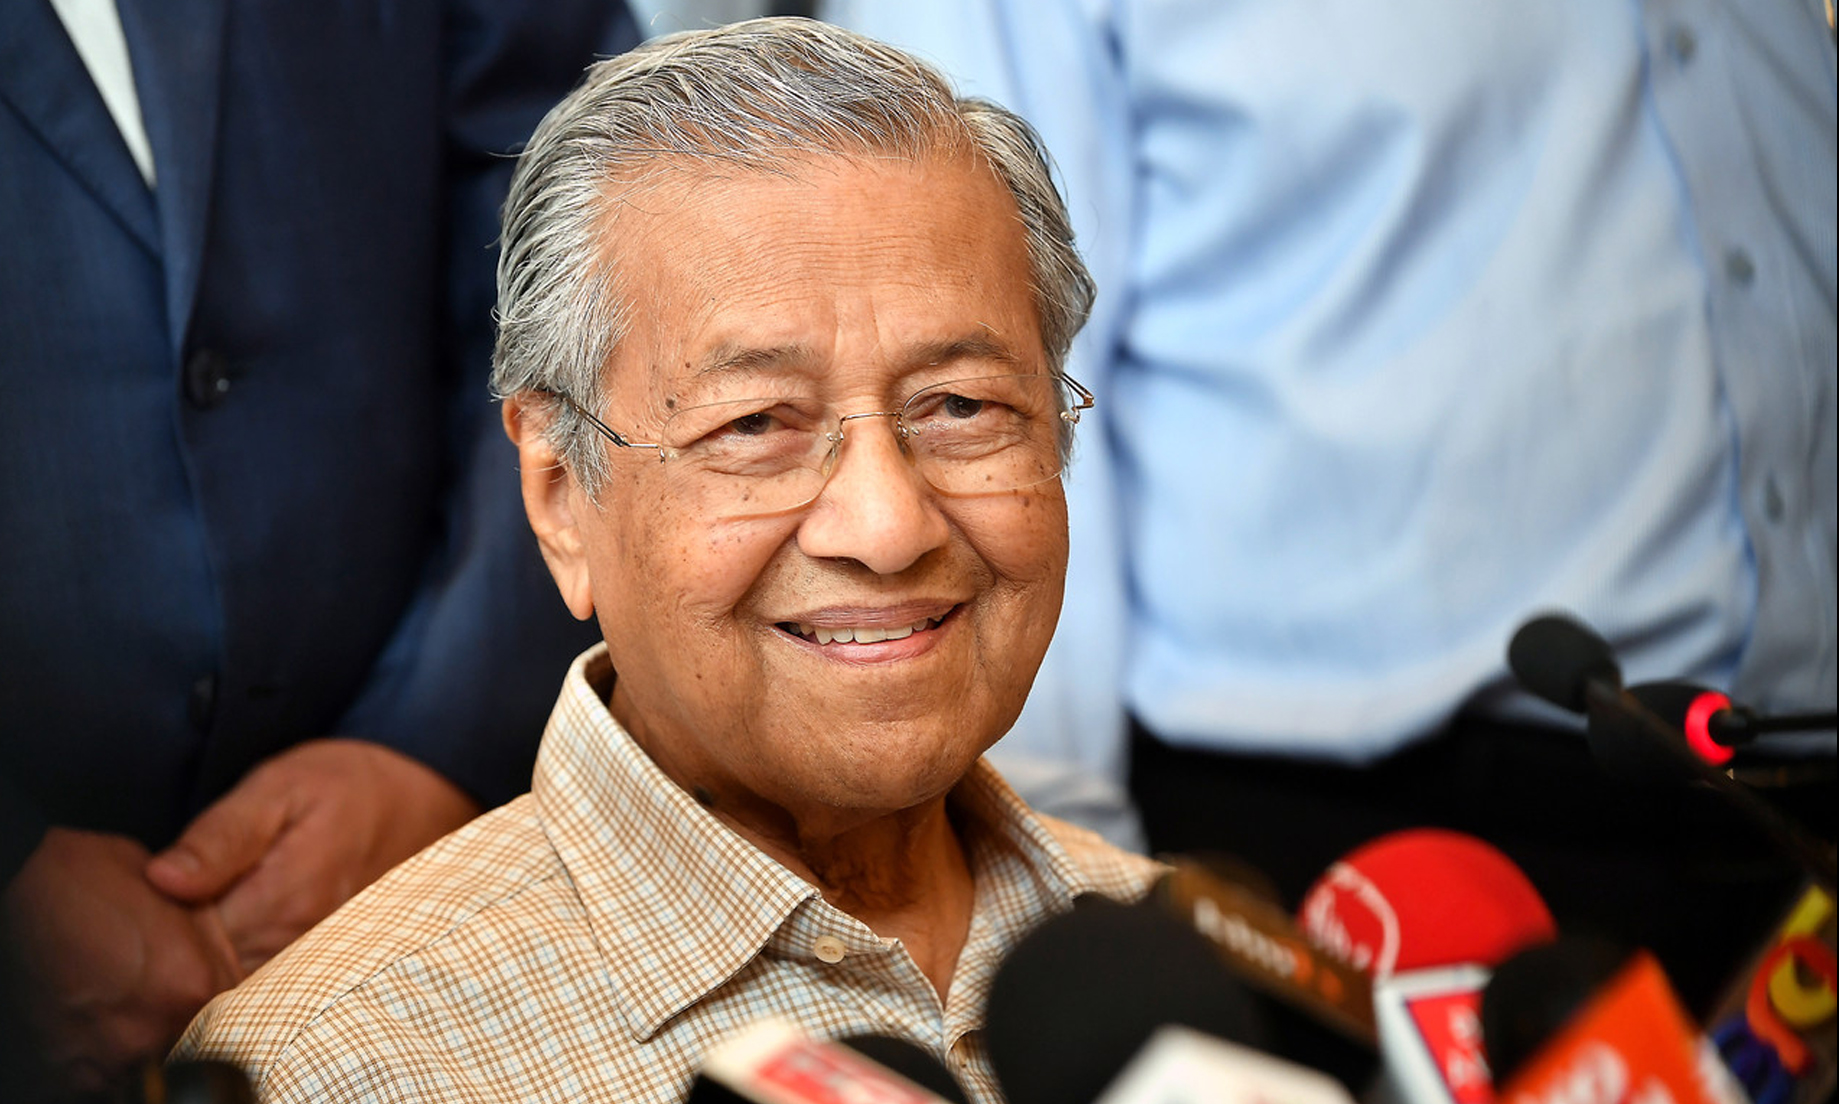 Mahathir’s Visit To The Philippines Shows Malaysia’s Seriousness In Strengthening Ties